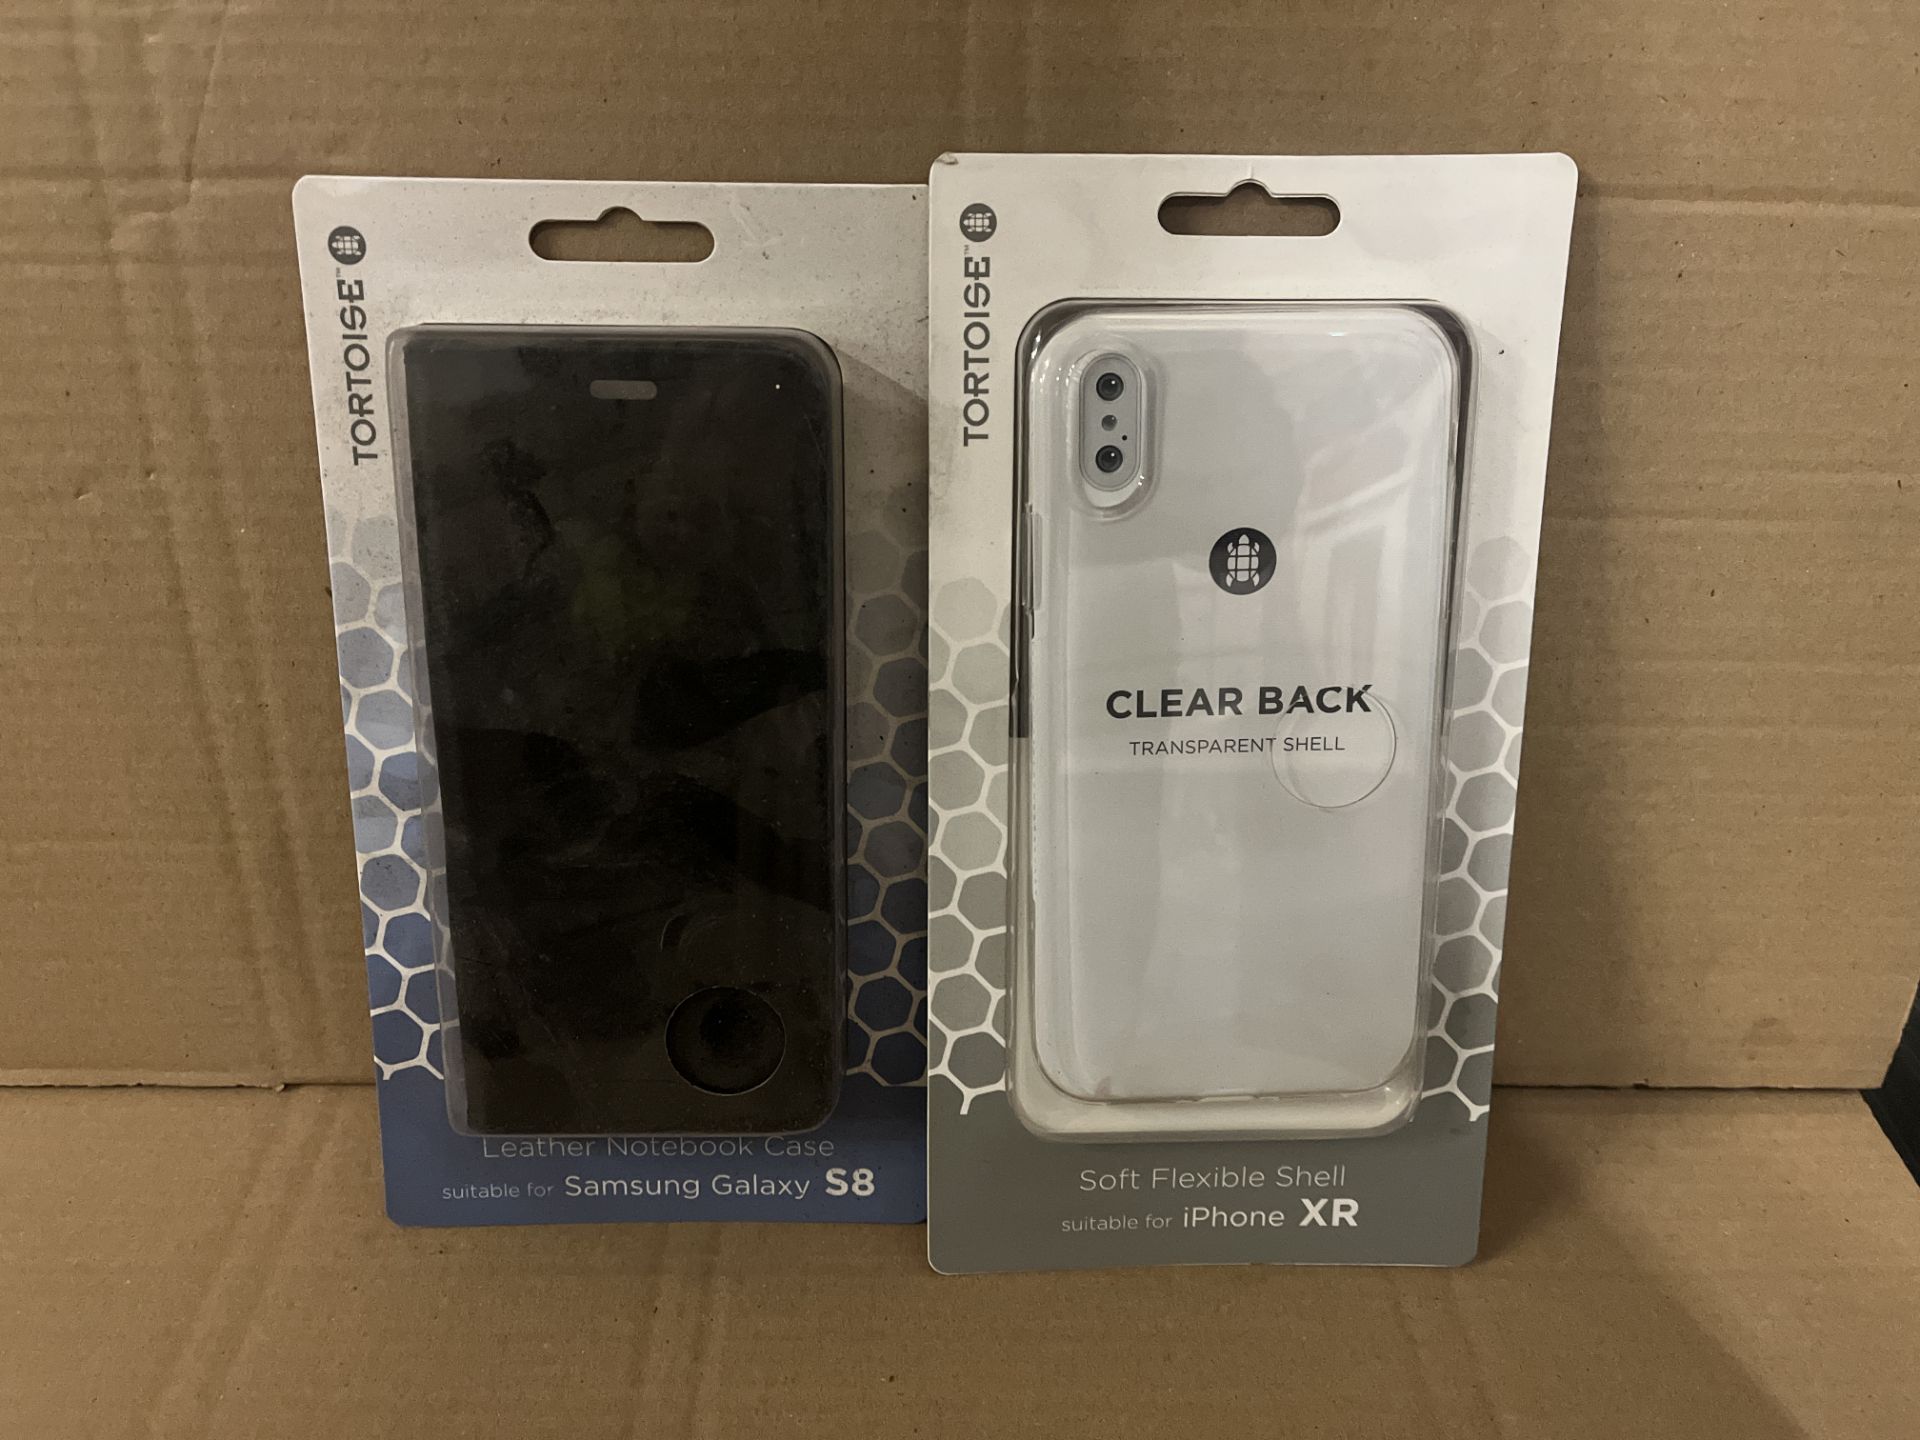 300 X BRAND NEW PHONE CASES INCLUDING TORTOISE CLEAR FOR IPHONE XR AND TORTOISE SAMSUNG GALAXY S9